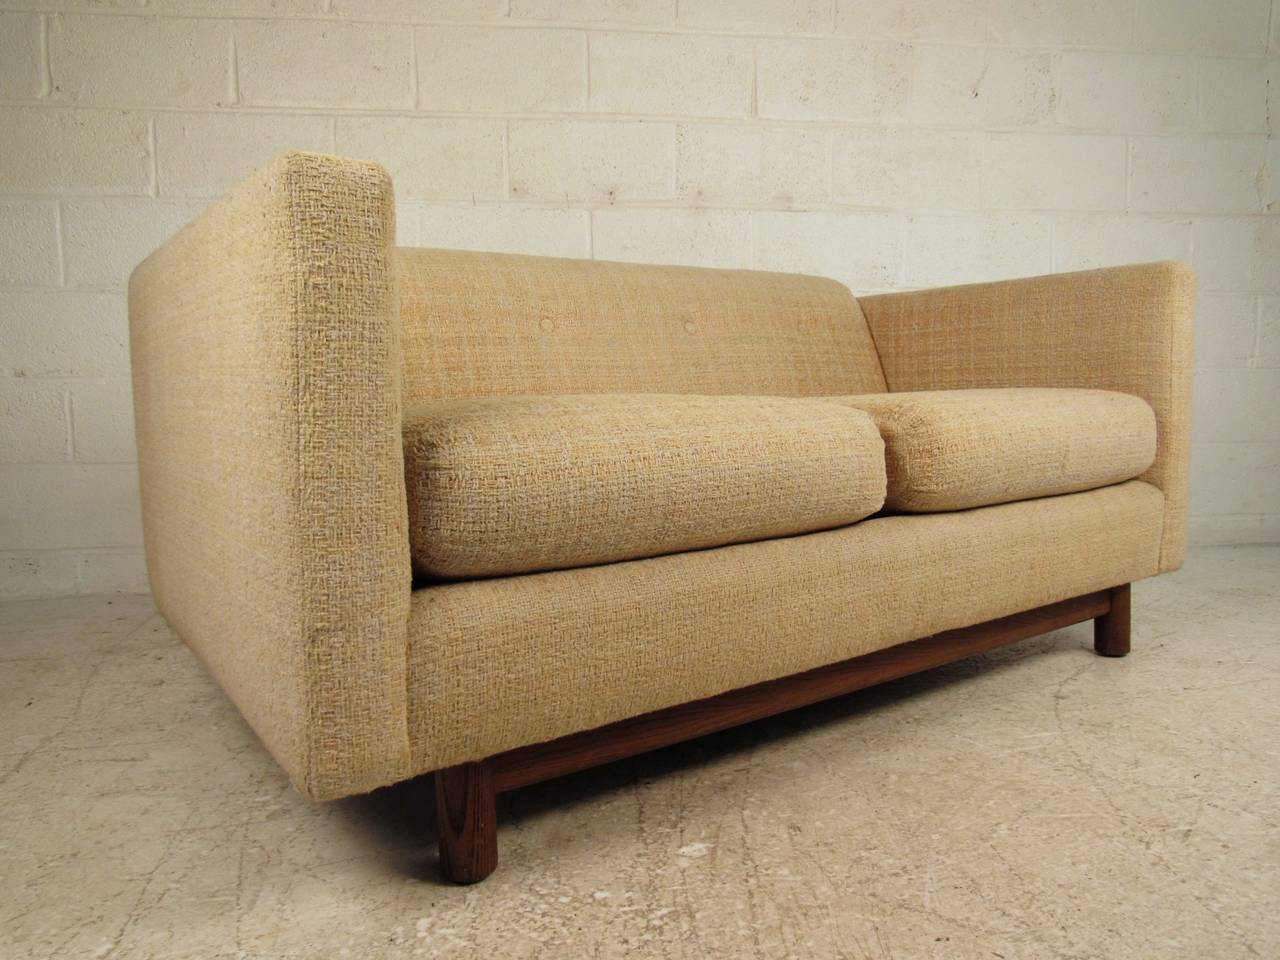 This comfortable and stylish two-seat sofa makes a stylish vintage addition to any interior. Perfect seating for home or business, please confirm item location (NY or NJ).